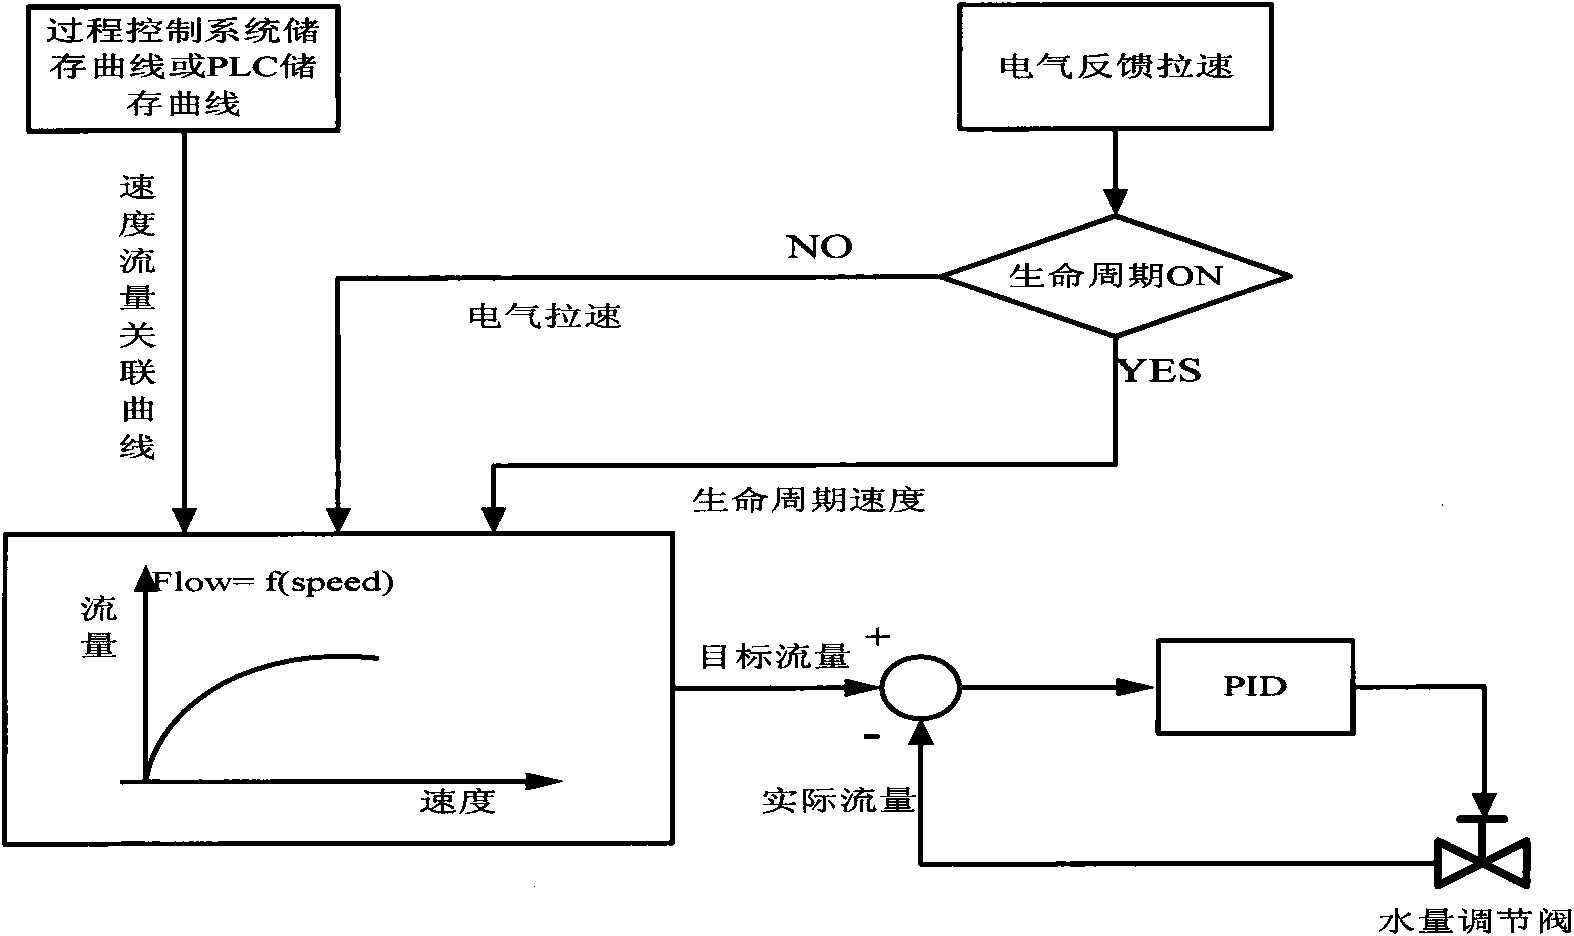 System for realizing life cycle model of plate blank in basic automation